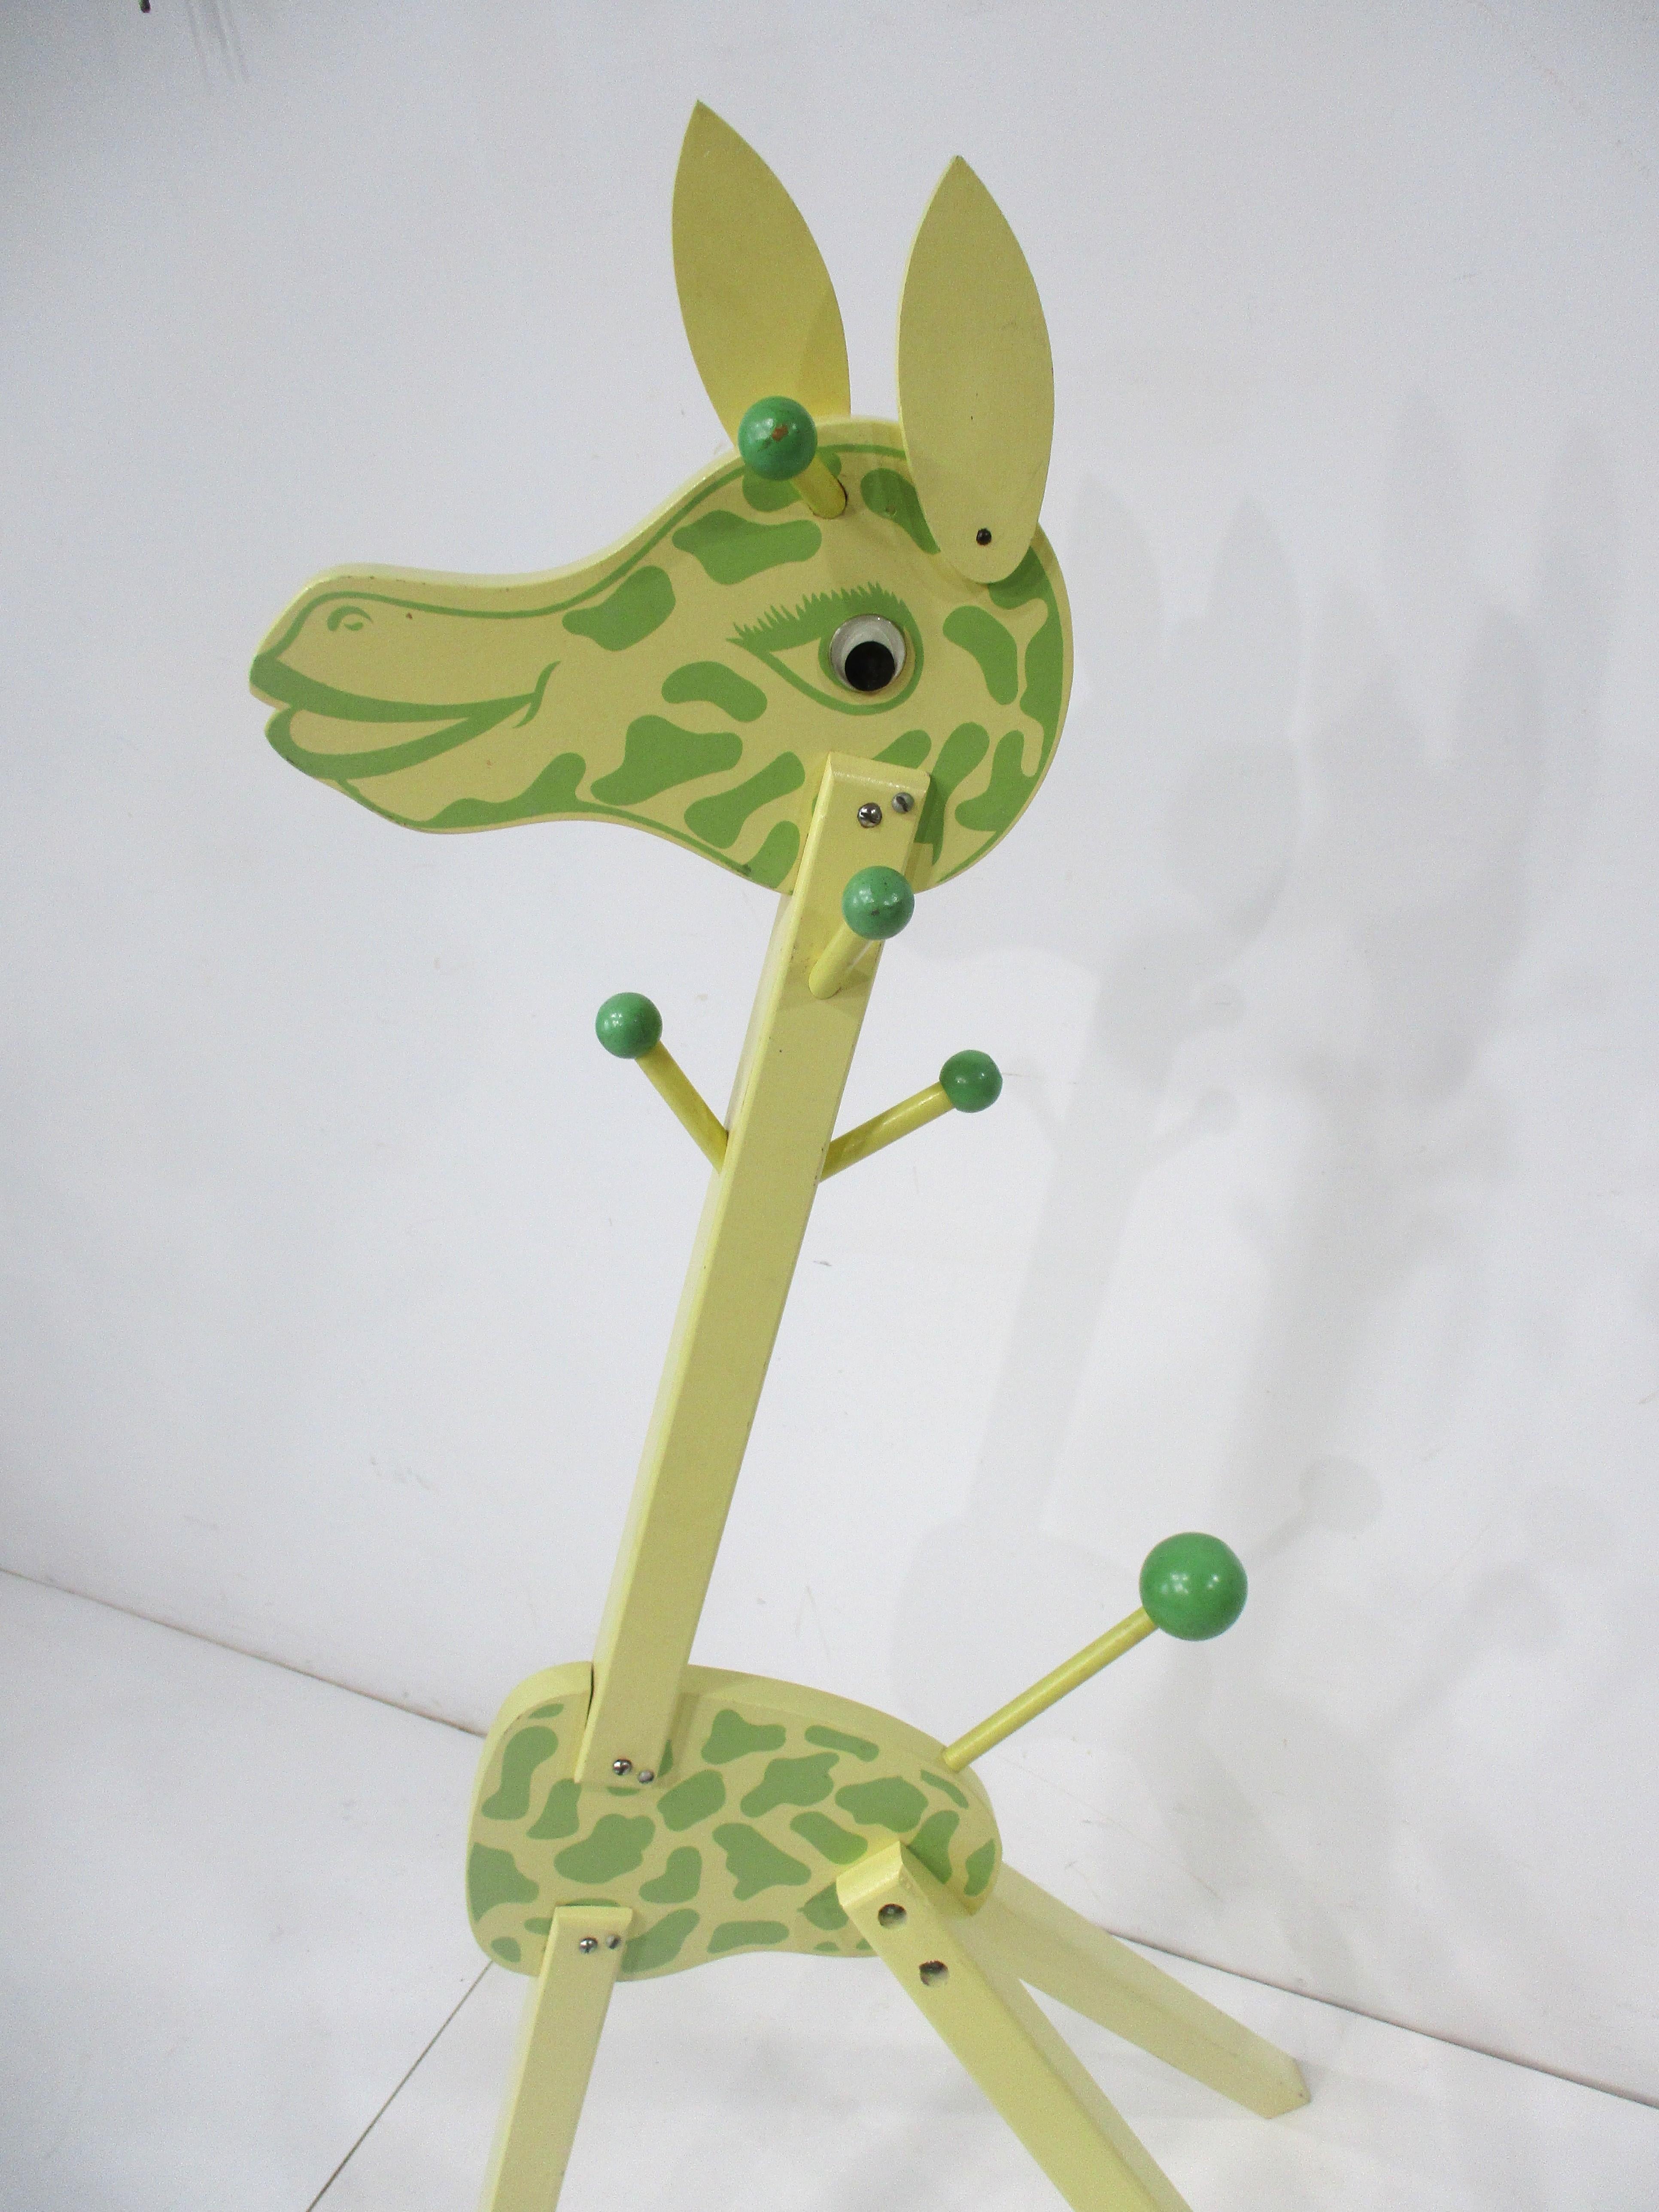 A super cute wooden giraffe childs clothing tree named Irmi in a very mellow yellow detailed with light green painted face and body spots . The body has hanger posts with contrasting colored balls and plastic eyes giving the piece great character ,